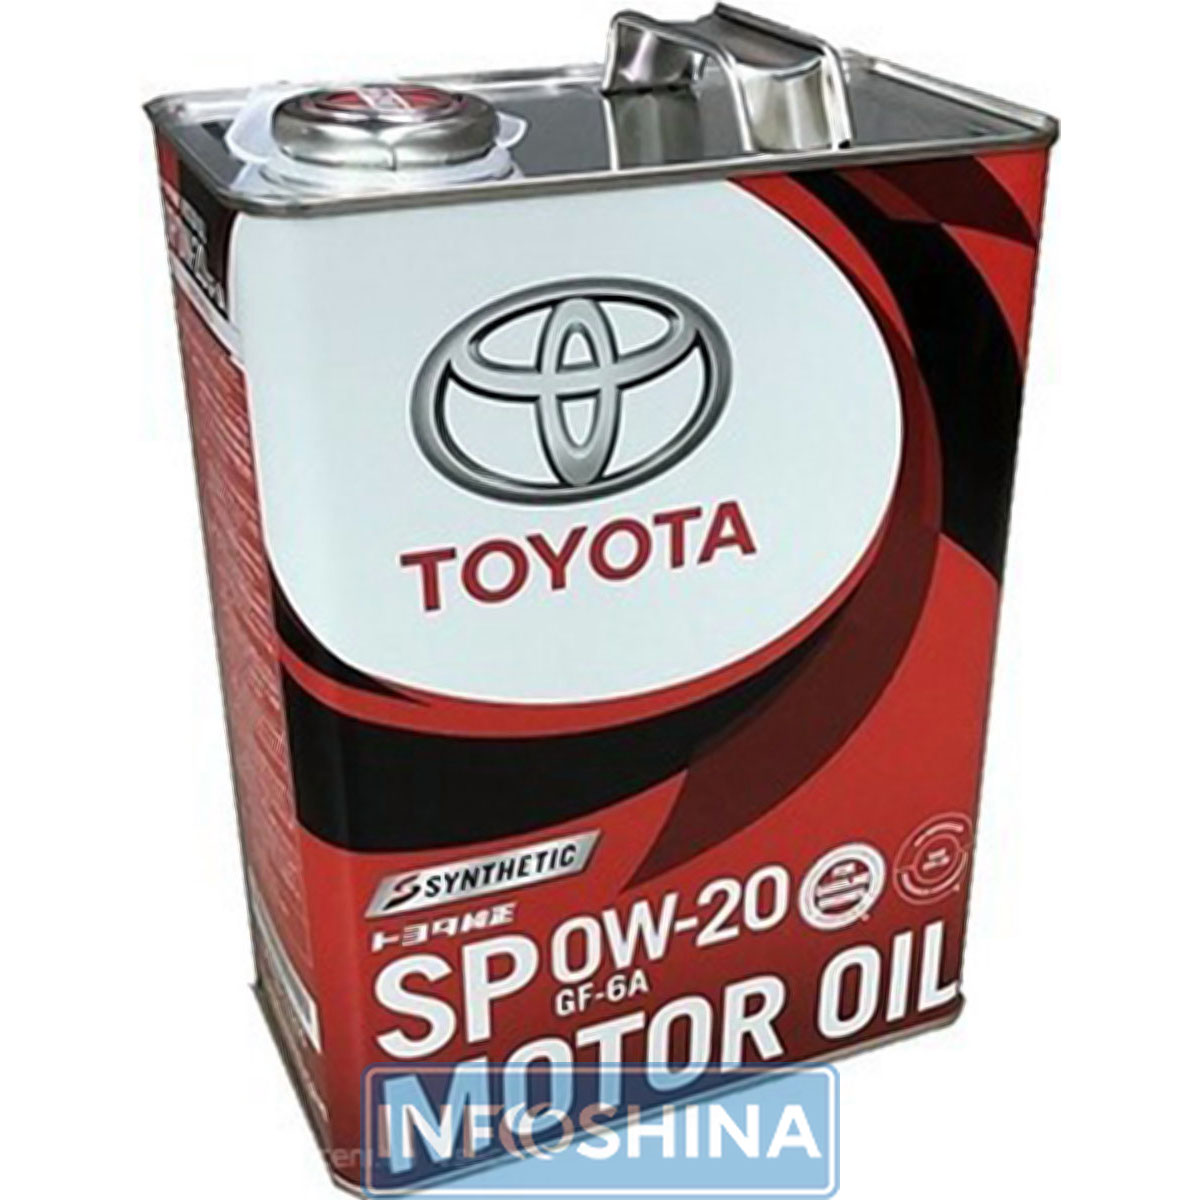 Купити масло Toyota Synthetic Motor Oil 0W-20 SP/GF-6A (4л)